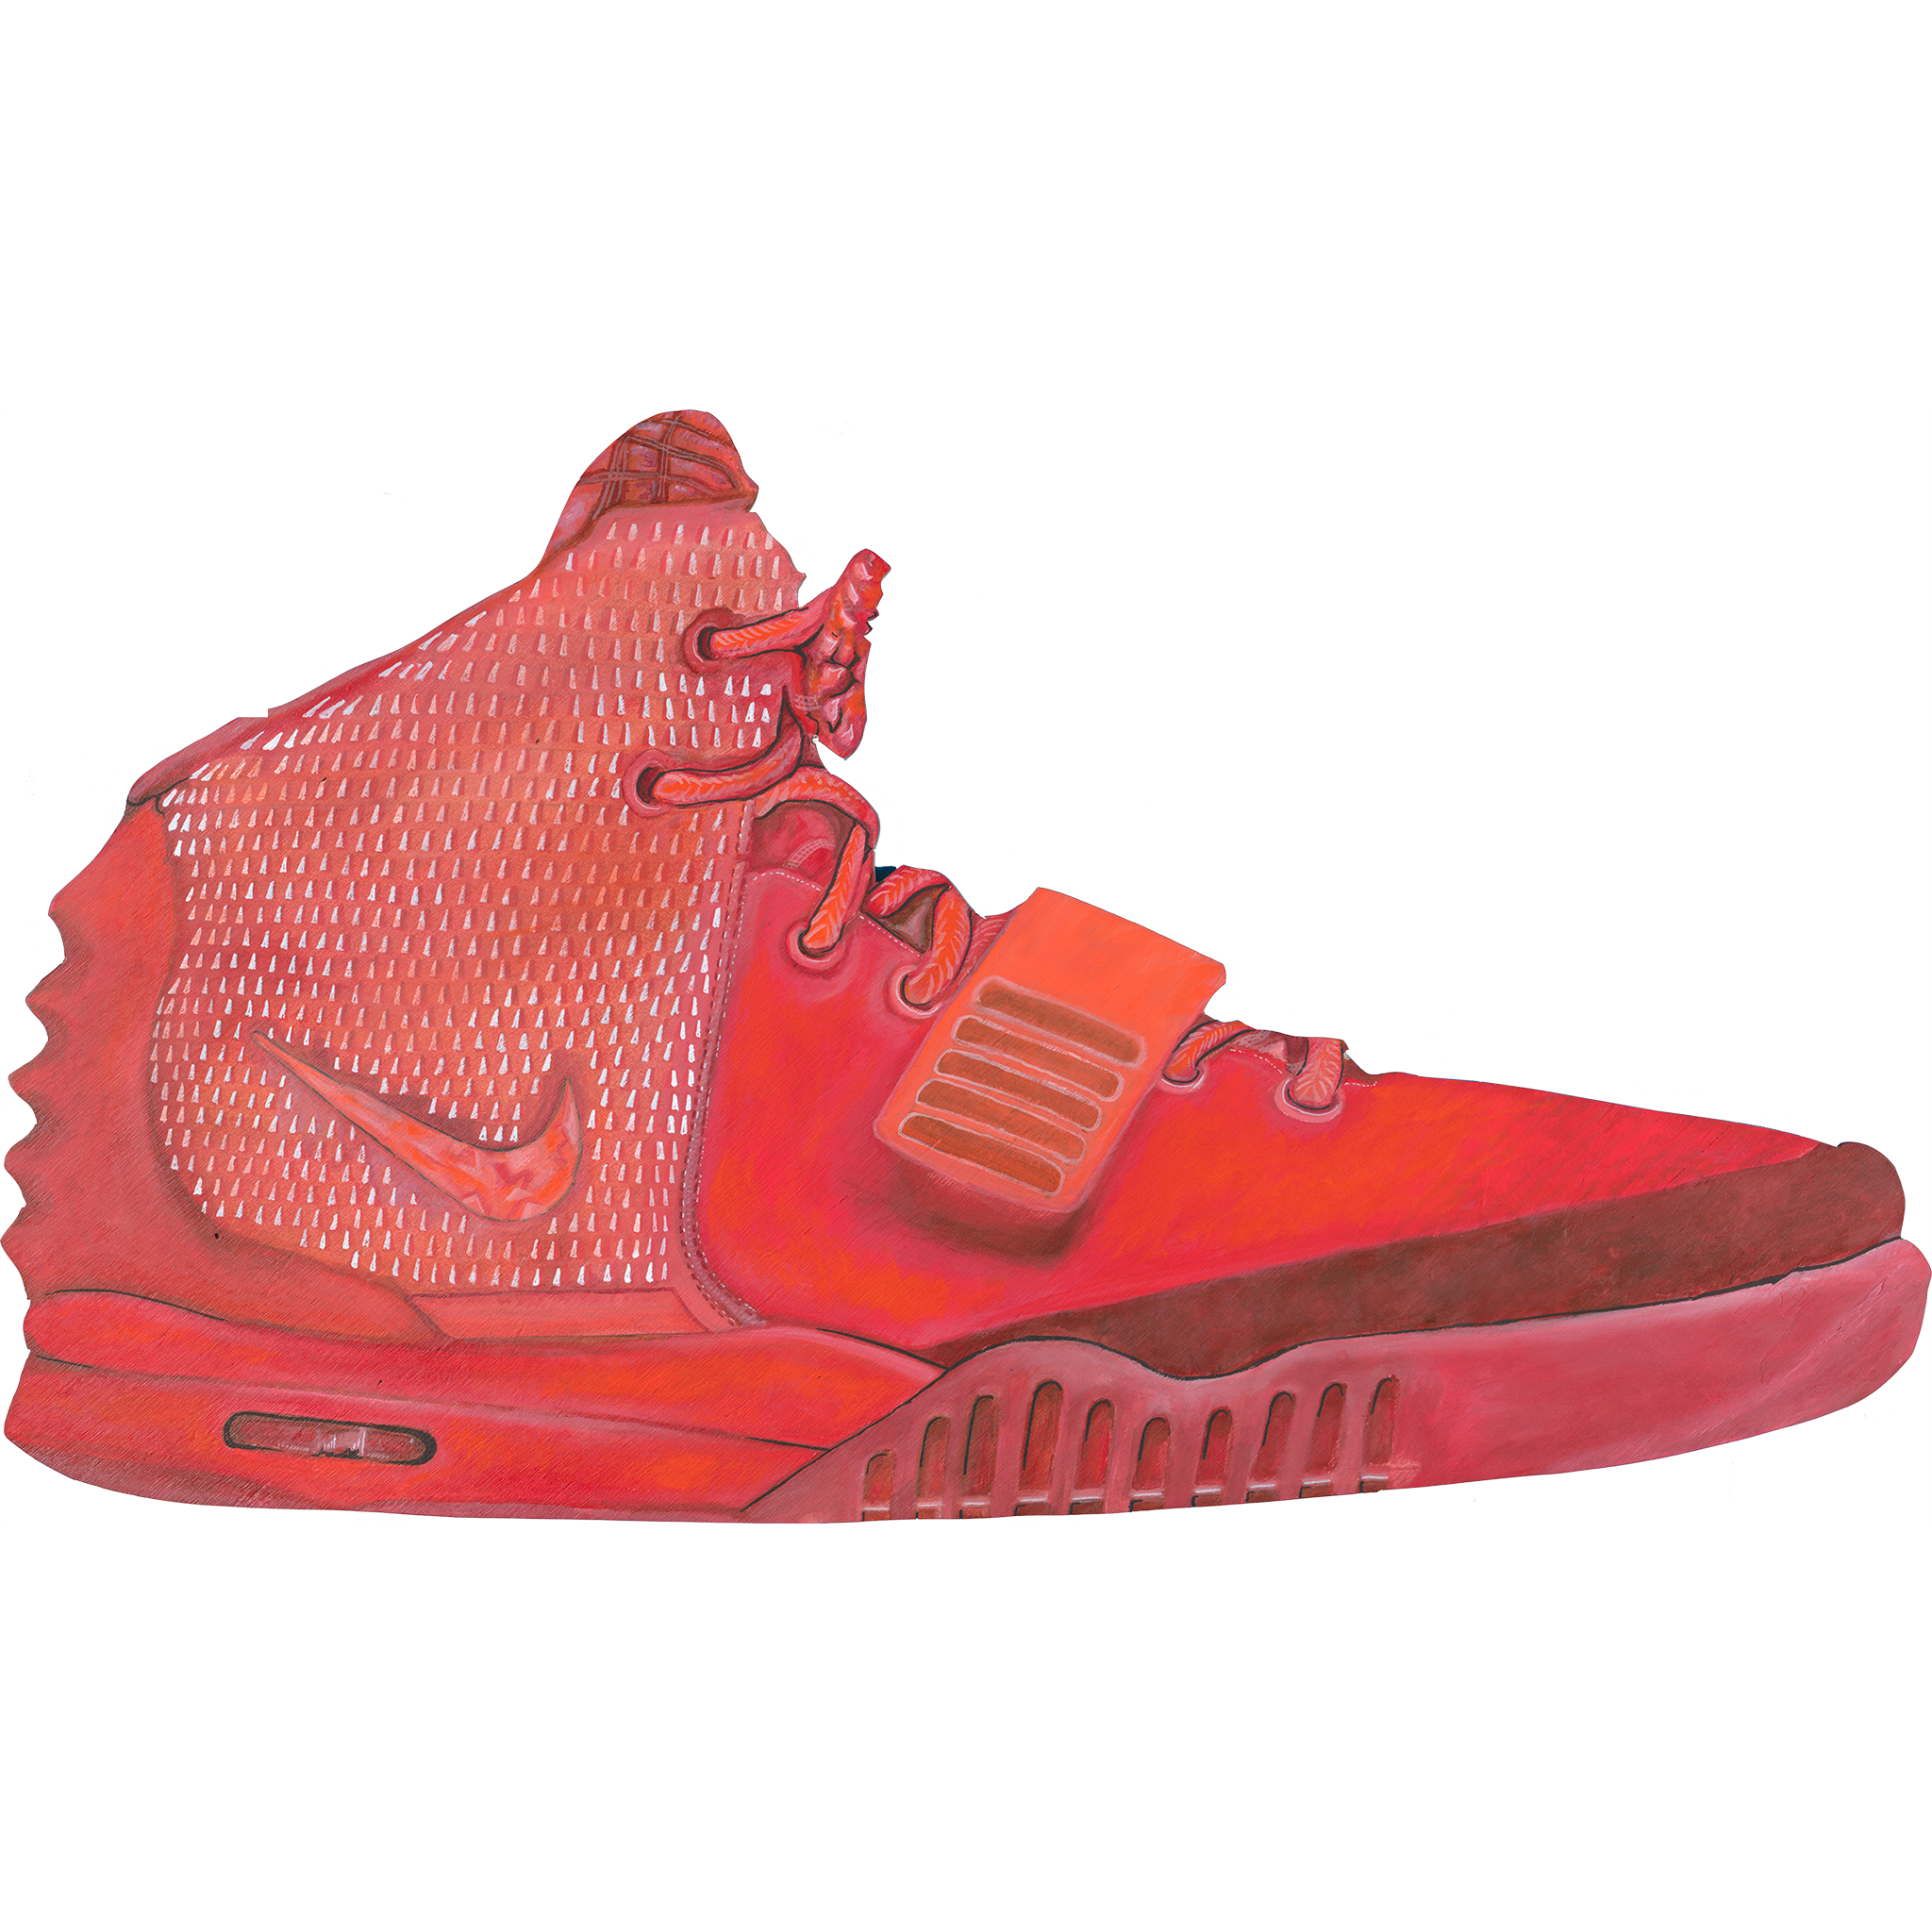 the red octobers